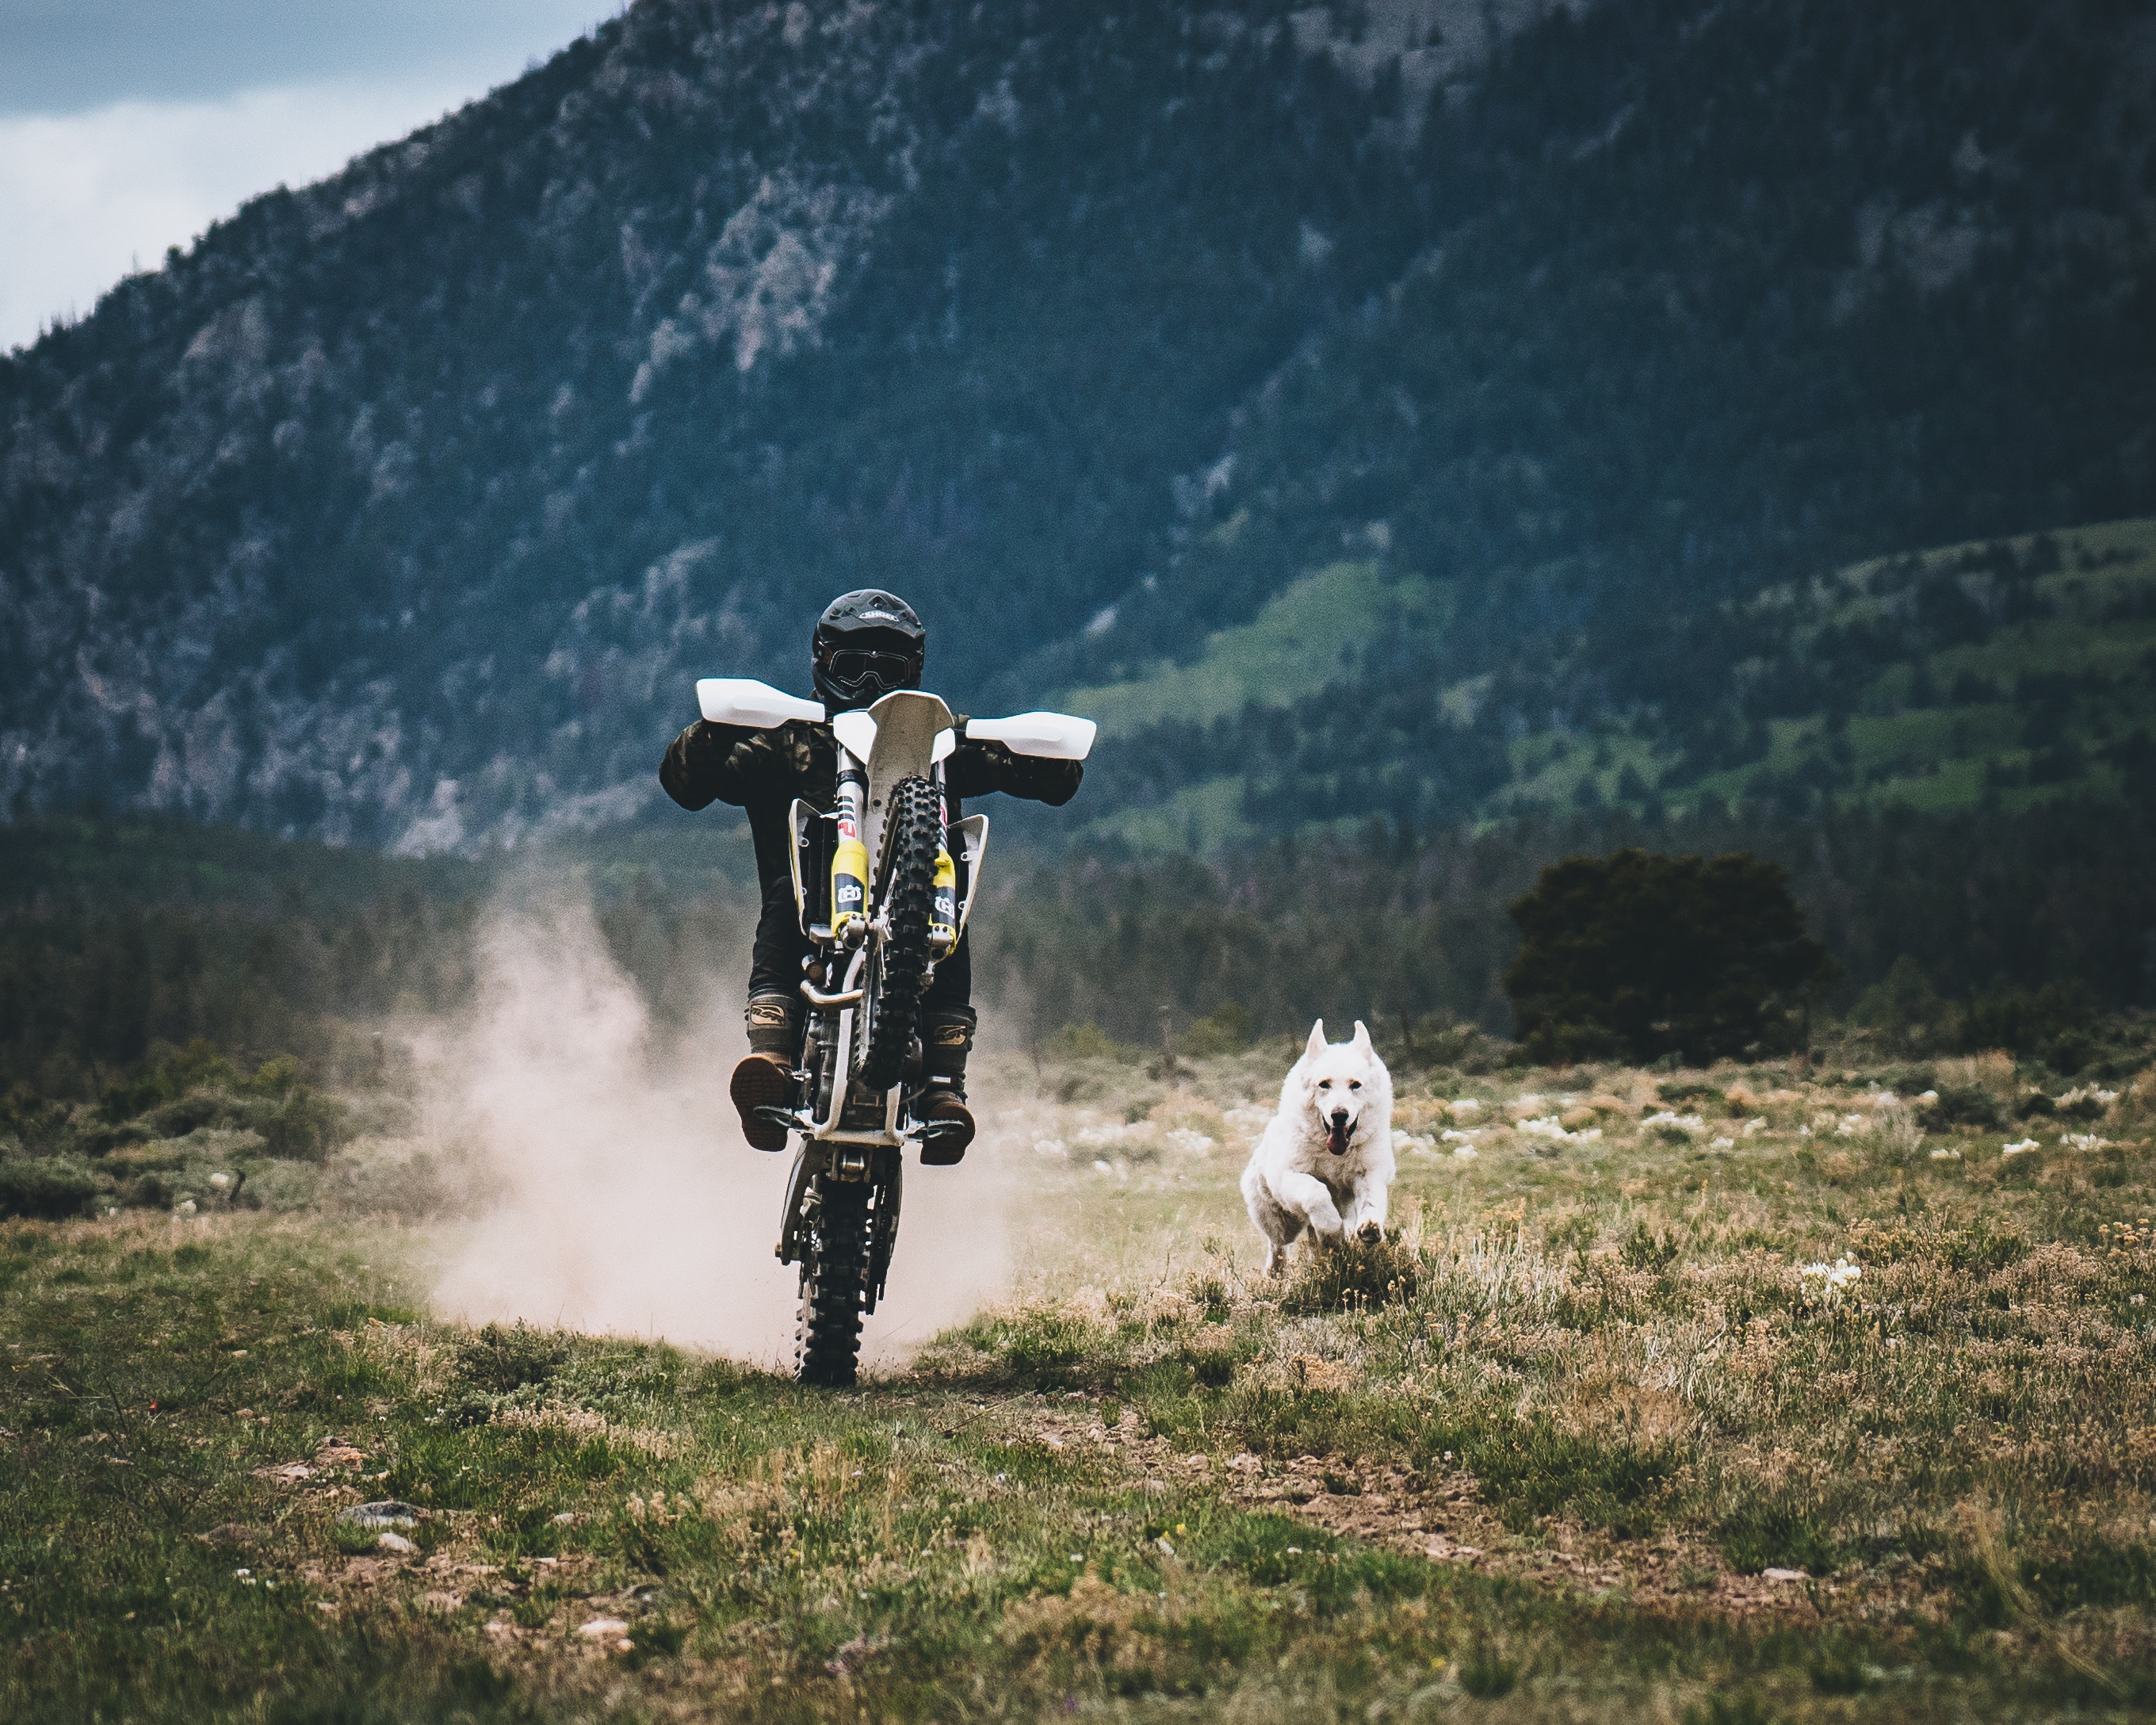 motorcycles, motorcyclist, races, grass, dog